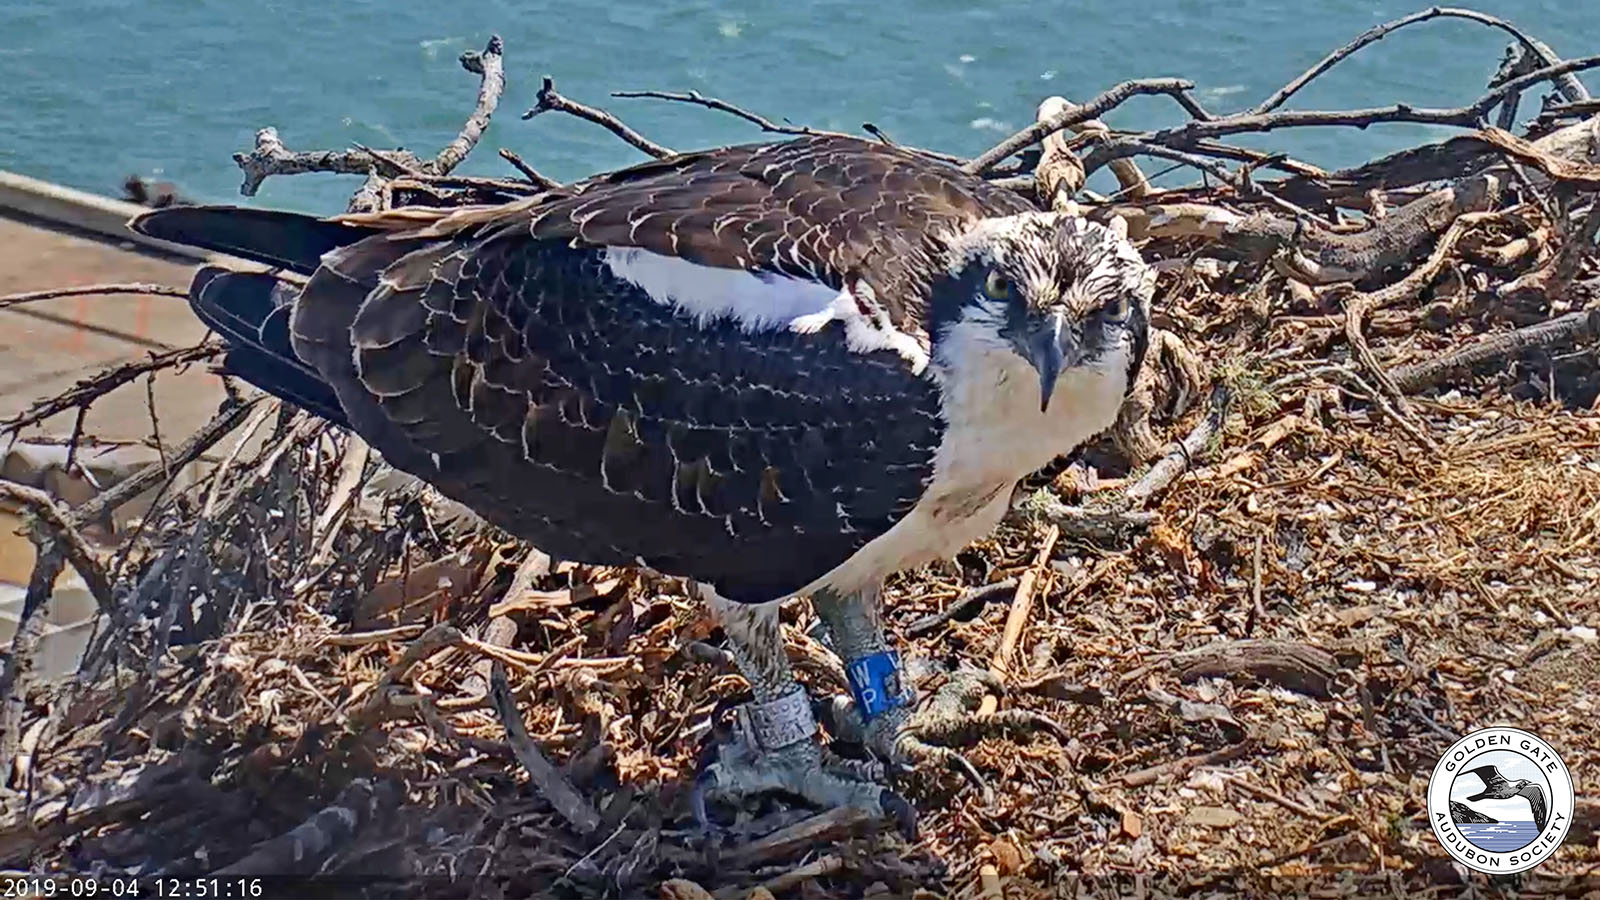 2020 juvenile Peace-up appeared on the nest several weeks after he had been seen on the nest